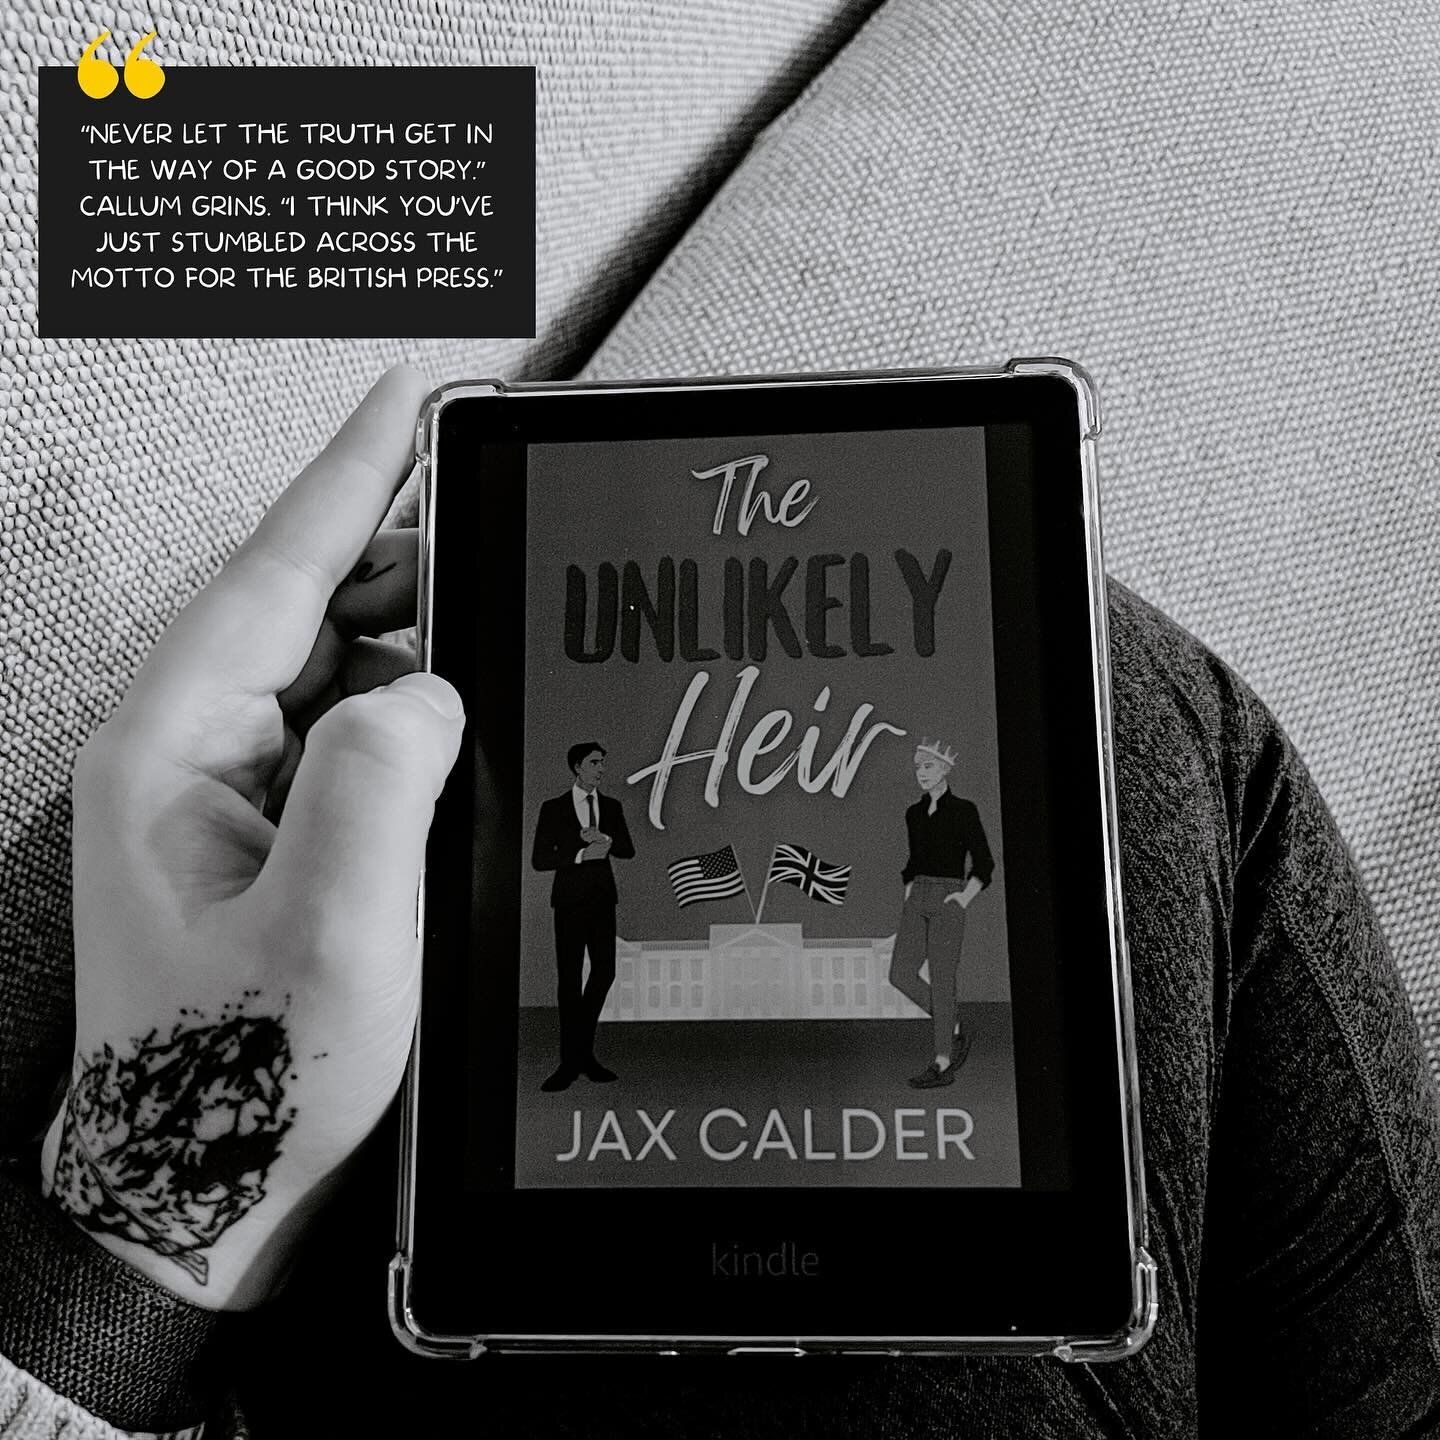 WHEW y&rsquo;all. I just finished The Unlikely Heir by @jaxcalderauthor and I gotta say, I freaking LOVED it. Forbidden royal romances are always gonna hit, ESPECIALLY when they tackle the ethics of modern monarchy, stolen items from Commonwealth cou